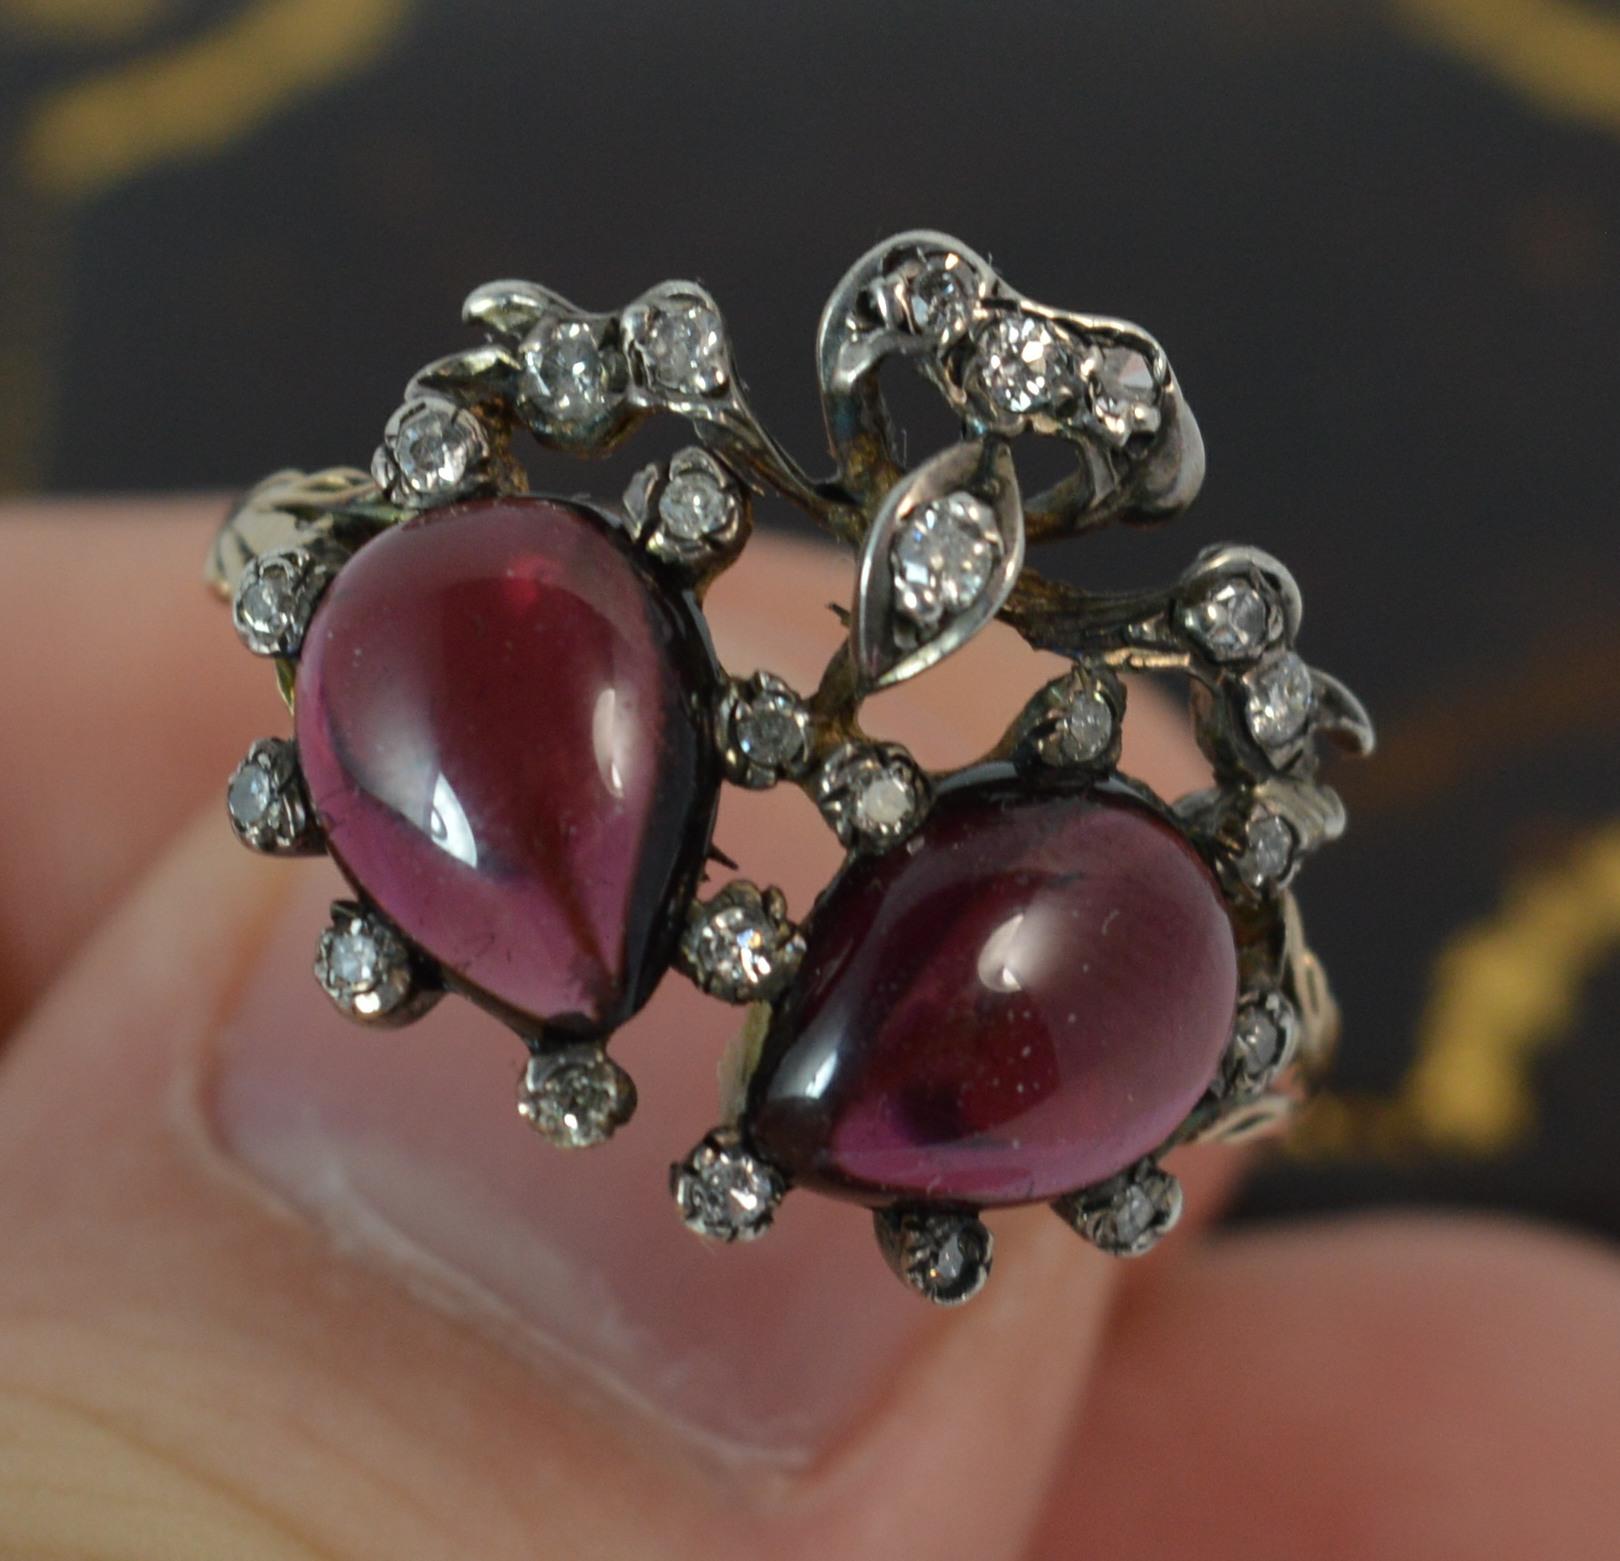 A stunning quality double heart design cluster ring.
SIZE ; Q UK, 8 US
Mid to late Victorian period piece, c1860.

Designed with two pear shaped garnet cabochon stones with natural old cut diamonds surrounding.

Fine yellow gold patterned